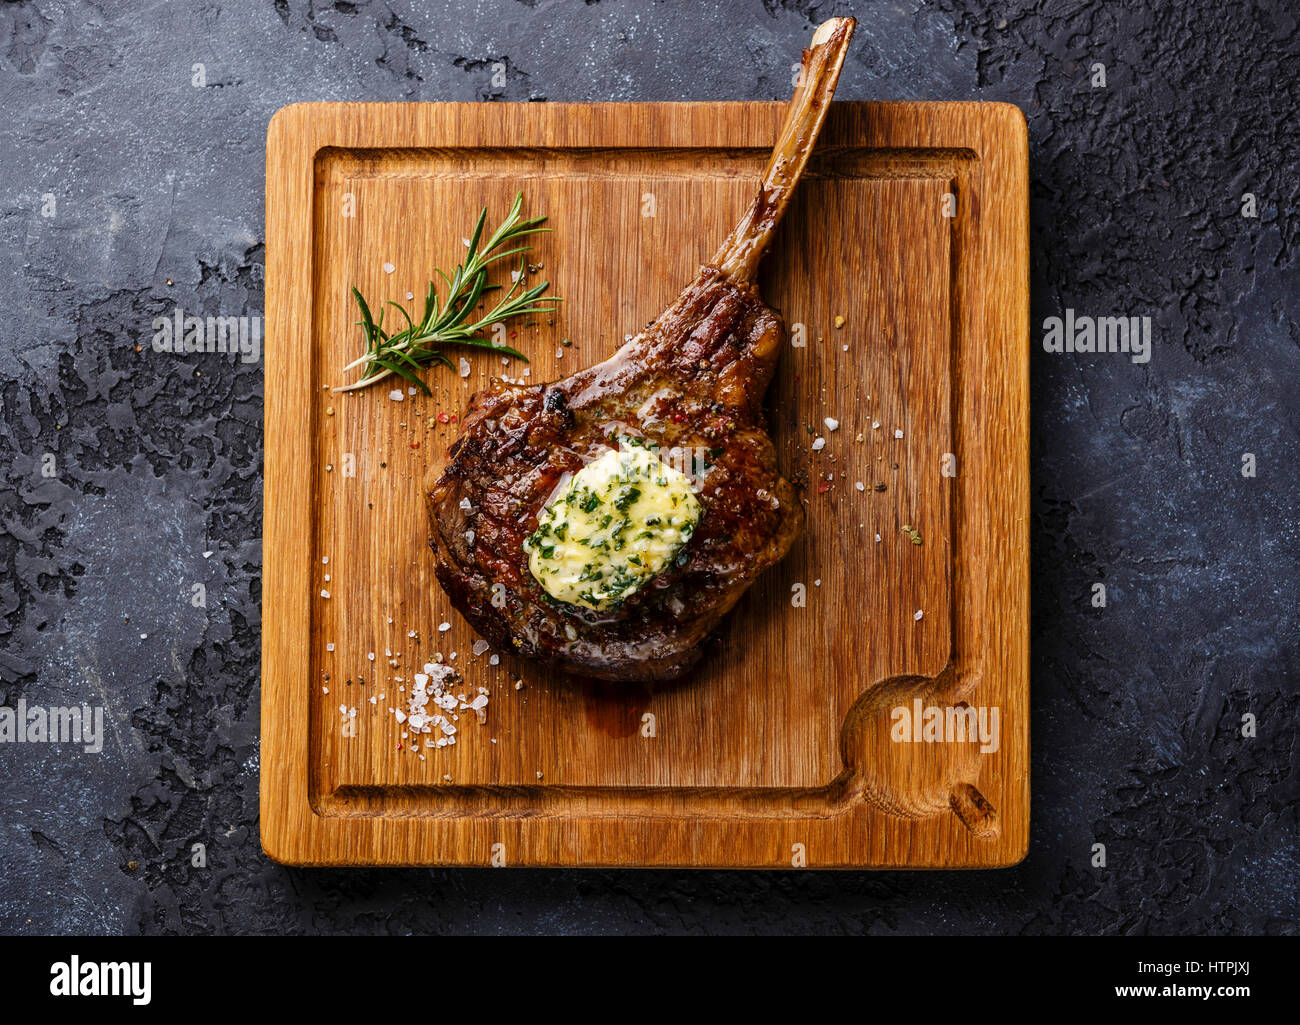 Grilled Steak on bone Veal rib with herb butter on cutting board on dark background Stock Photo